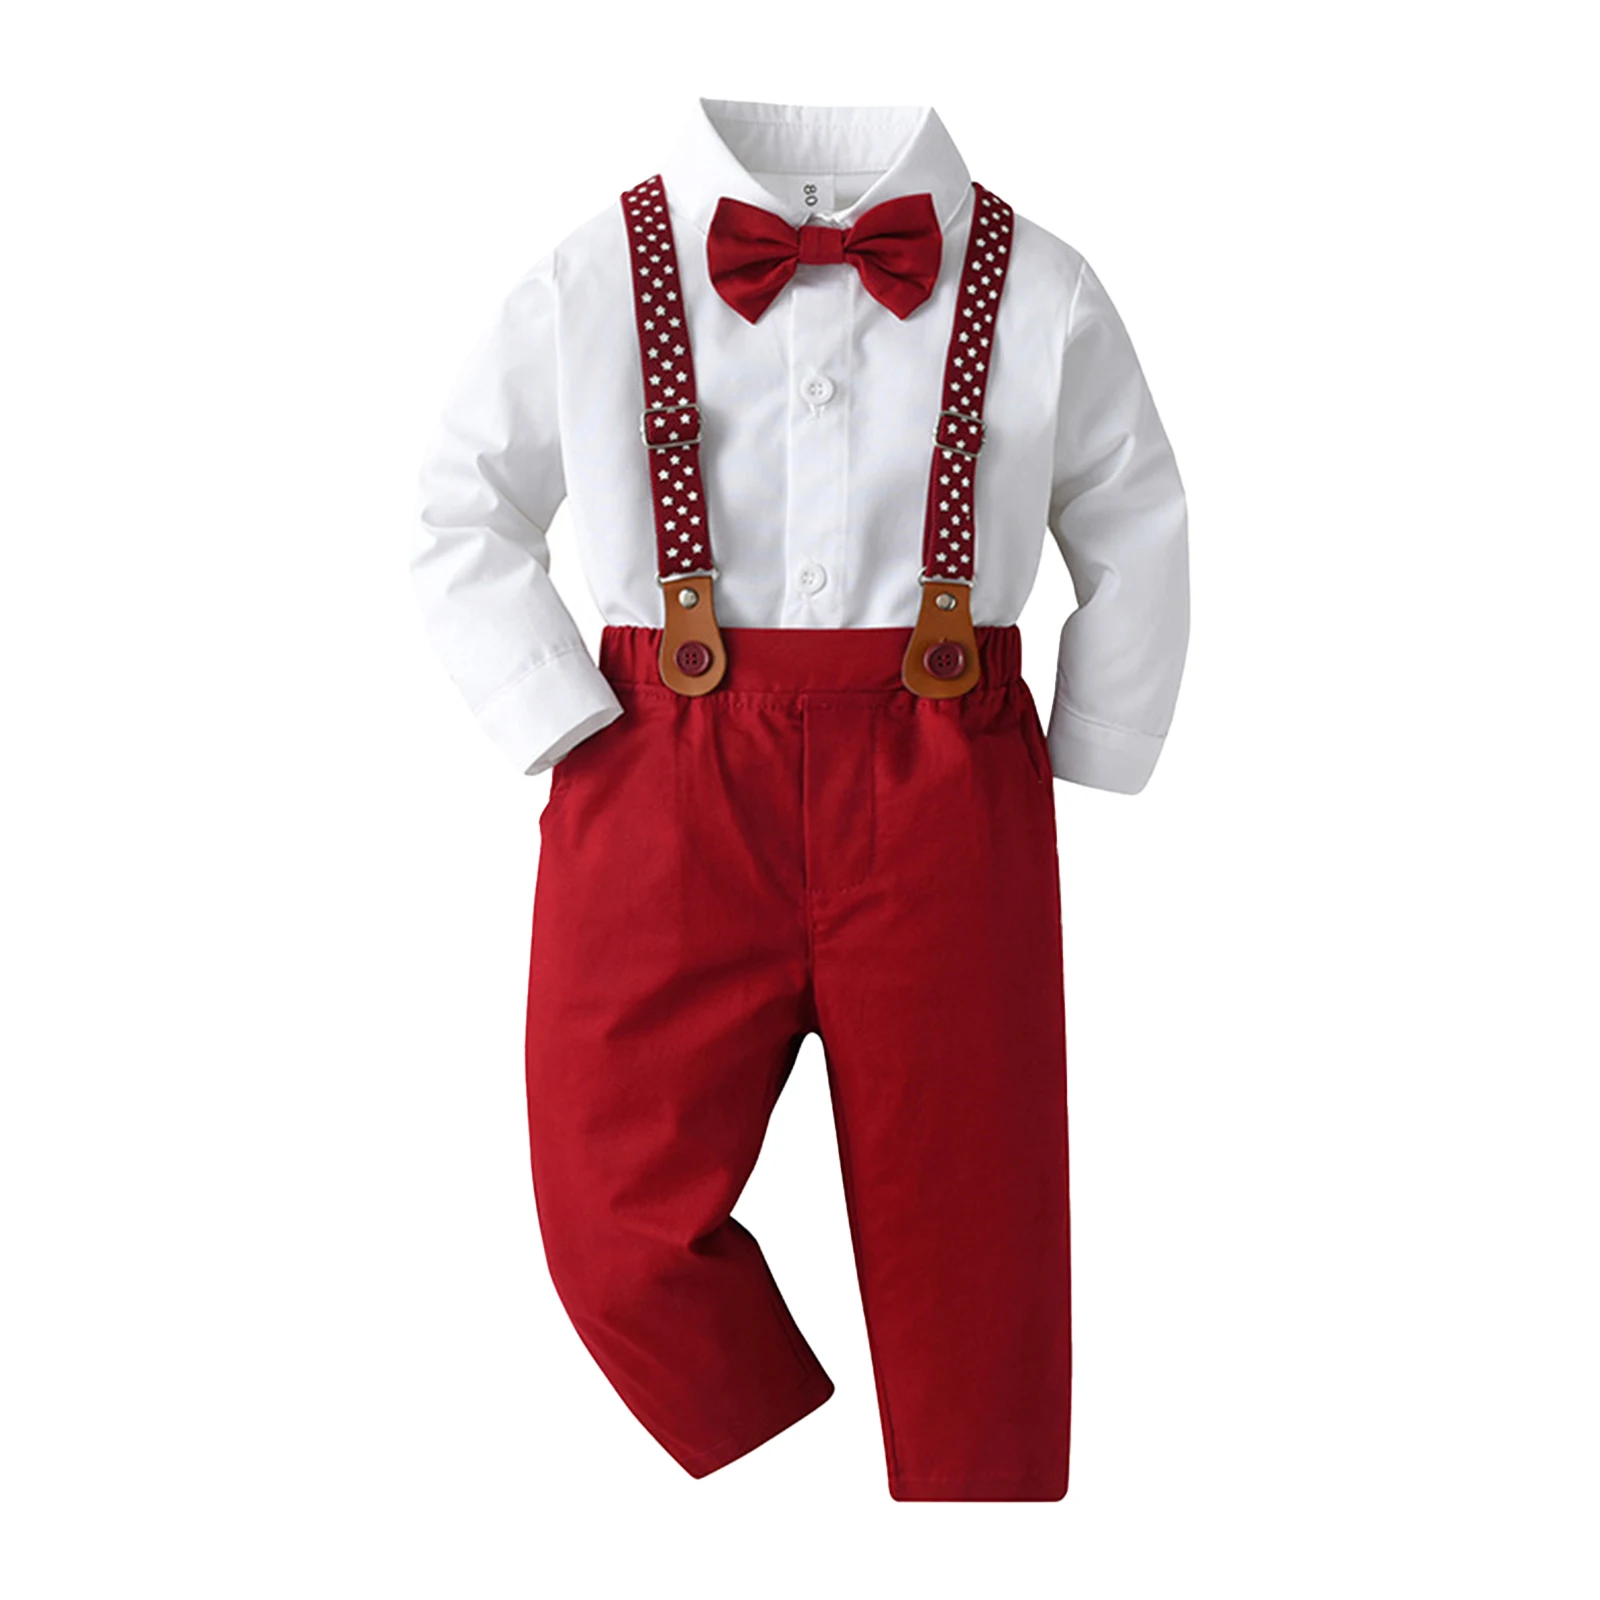 Baby Boys Gentleman Outfit Cotton Clothes Birthday Party Wedding Prom Gown Long Sleeve Shirt Top+Bowtie+Suspender Pants 3Pcs/Set 3pcs halloween cosplay costume giraffe hair hoop bow tie with tail masquerade party event costume props photography accessories